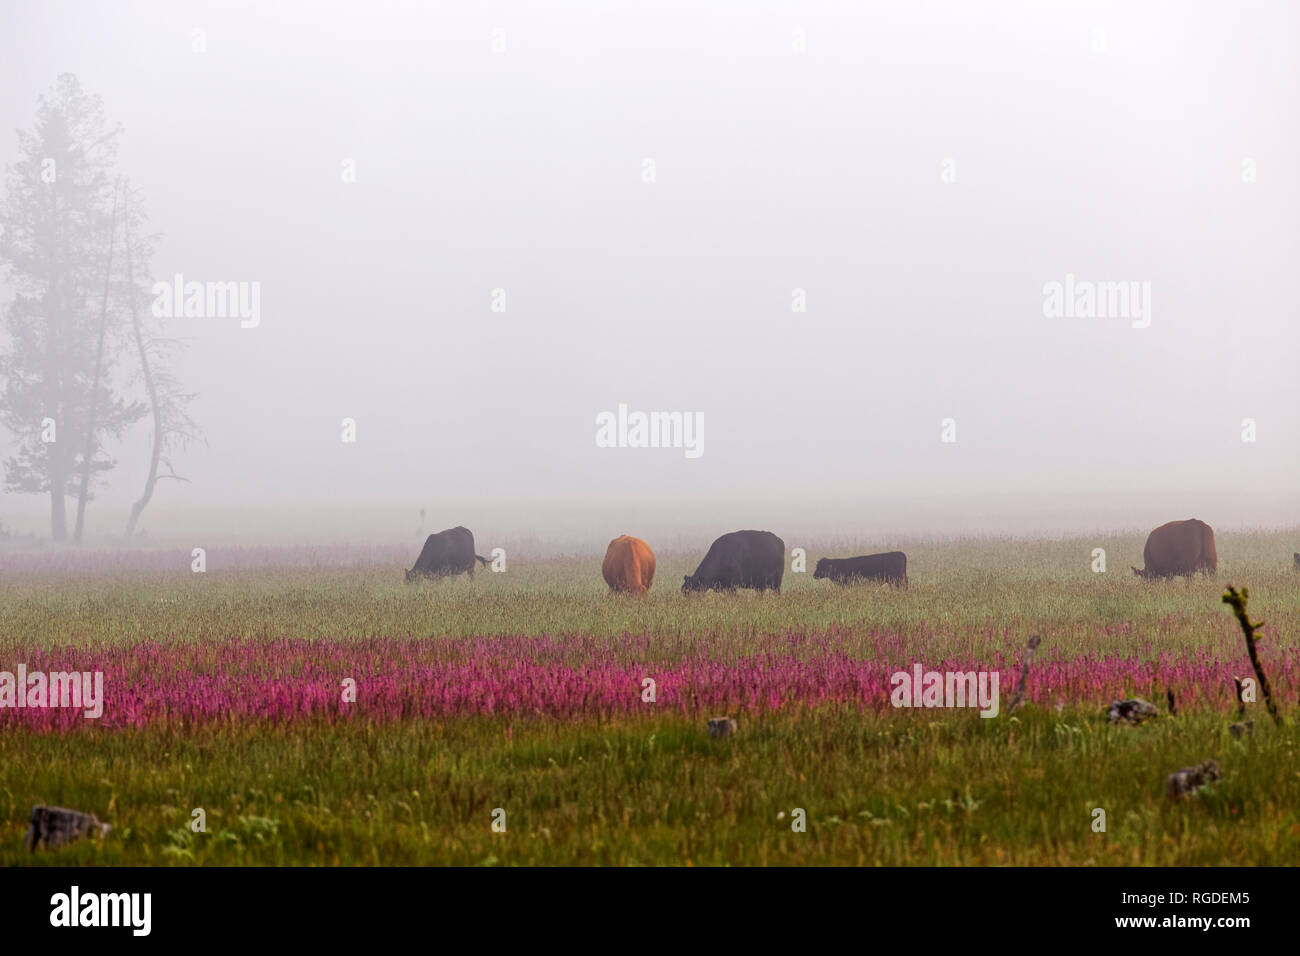 42,897.03868 five 5 beef cattle grazing in a gray foggy flat large prairie meadow with lavender flowers Stock Photo